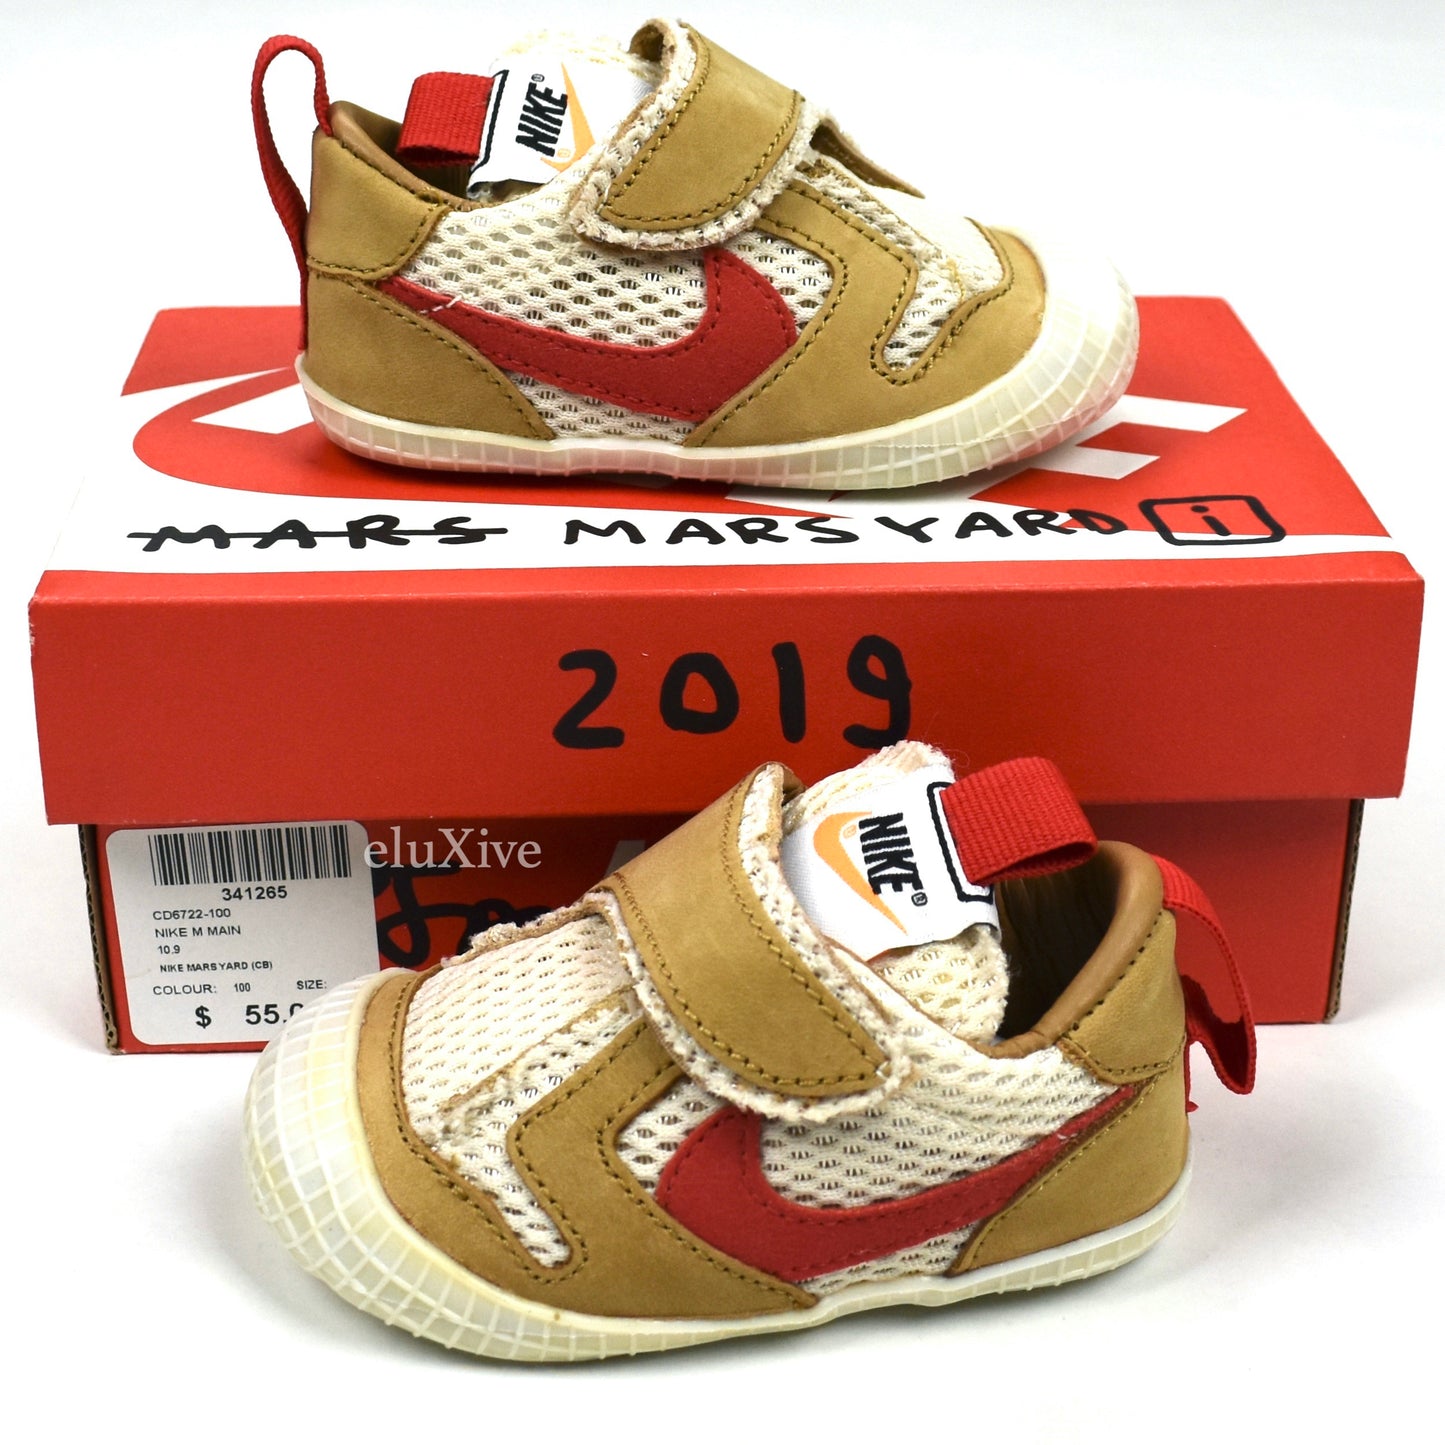 Nike x Tom Sachs - Mards Yard CB Infant/Baby Sneakers